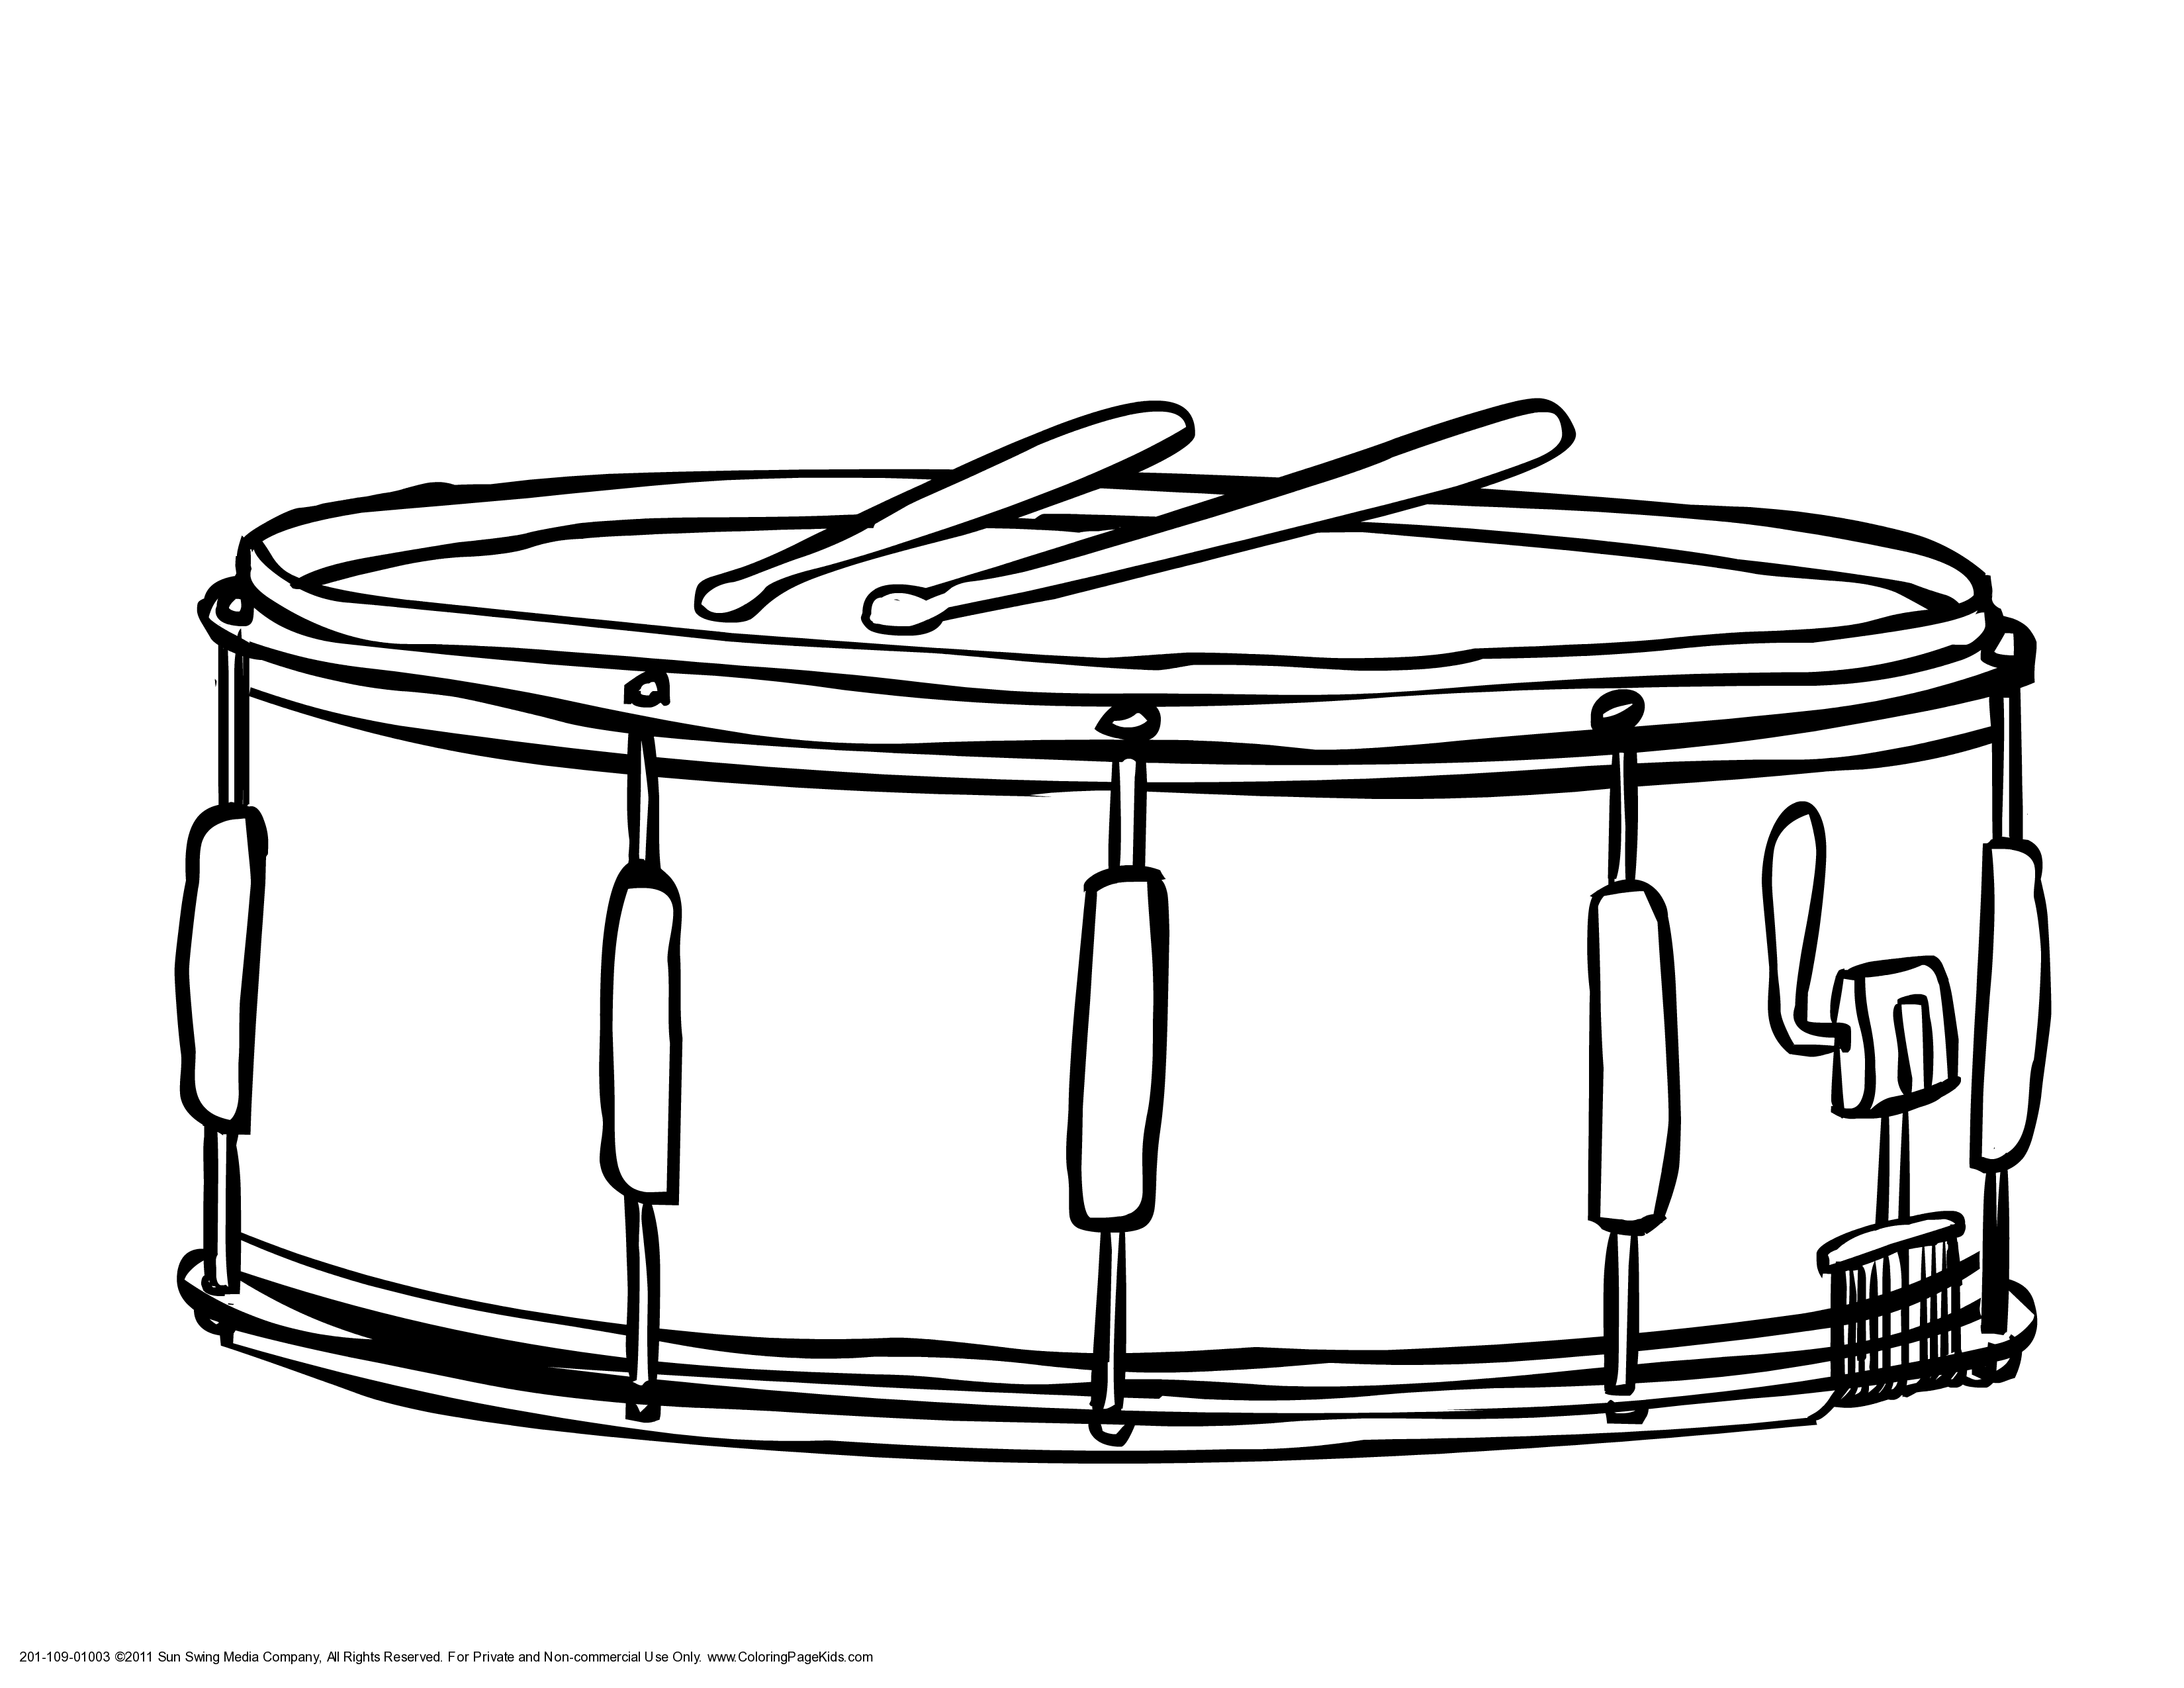 Snare drum image detail for t